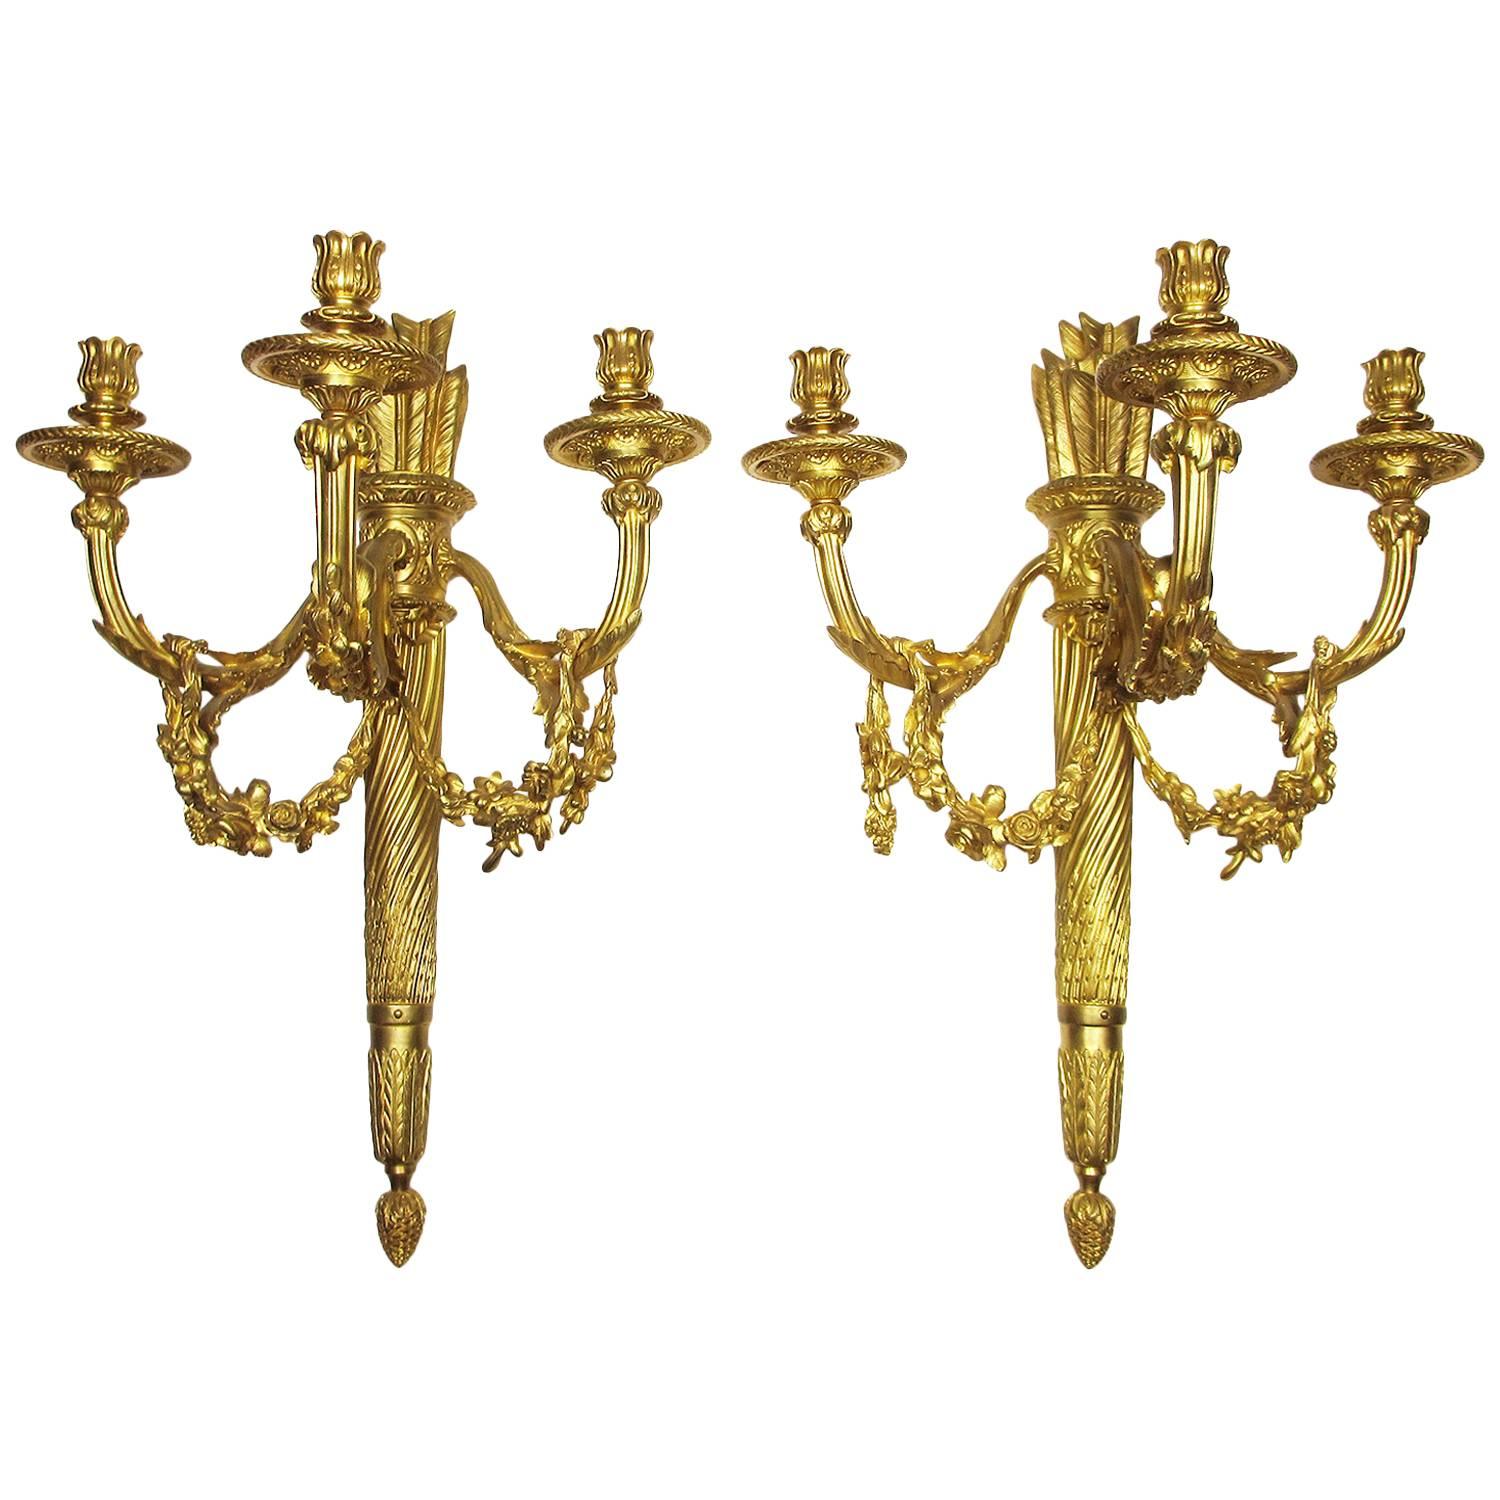 Pair of French 19th-20th Century Louis XVI Style Three-Light Wall Sconces